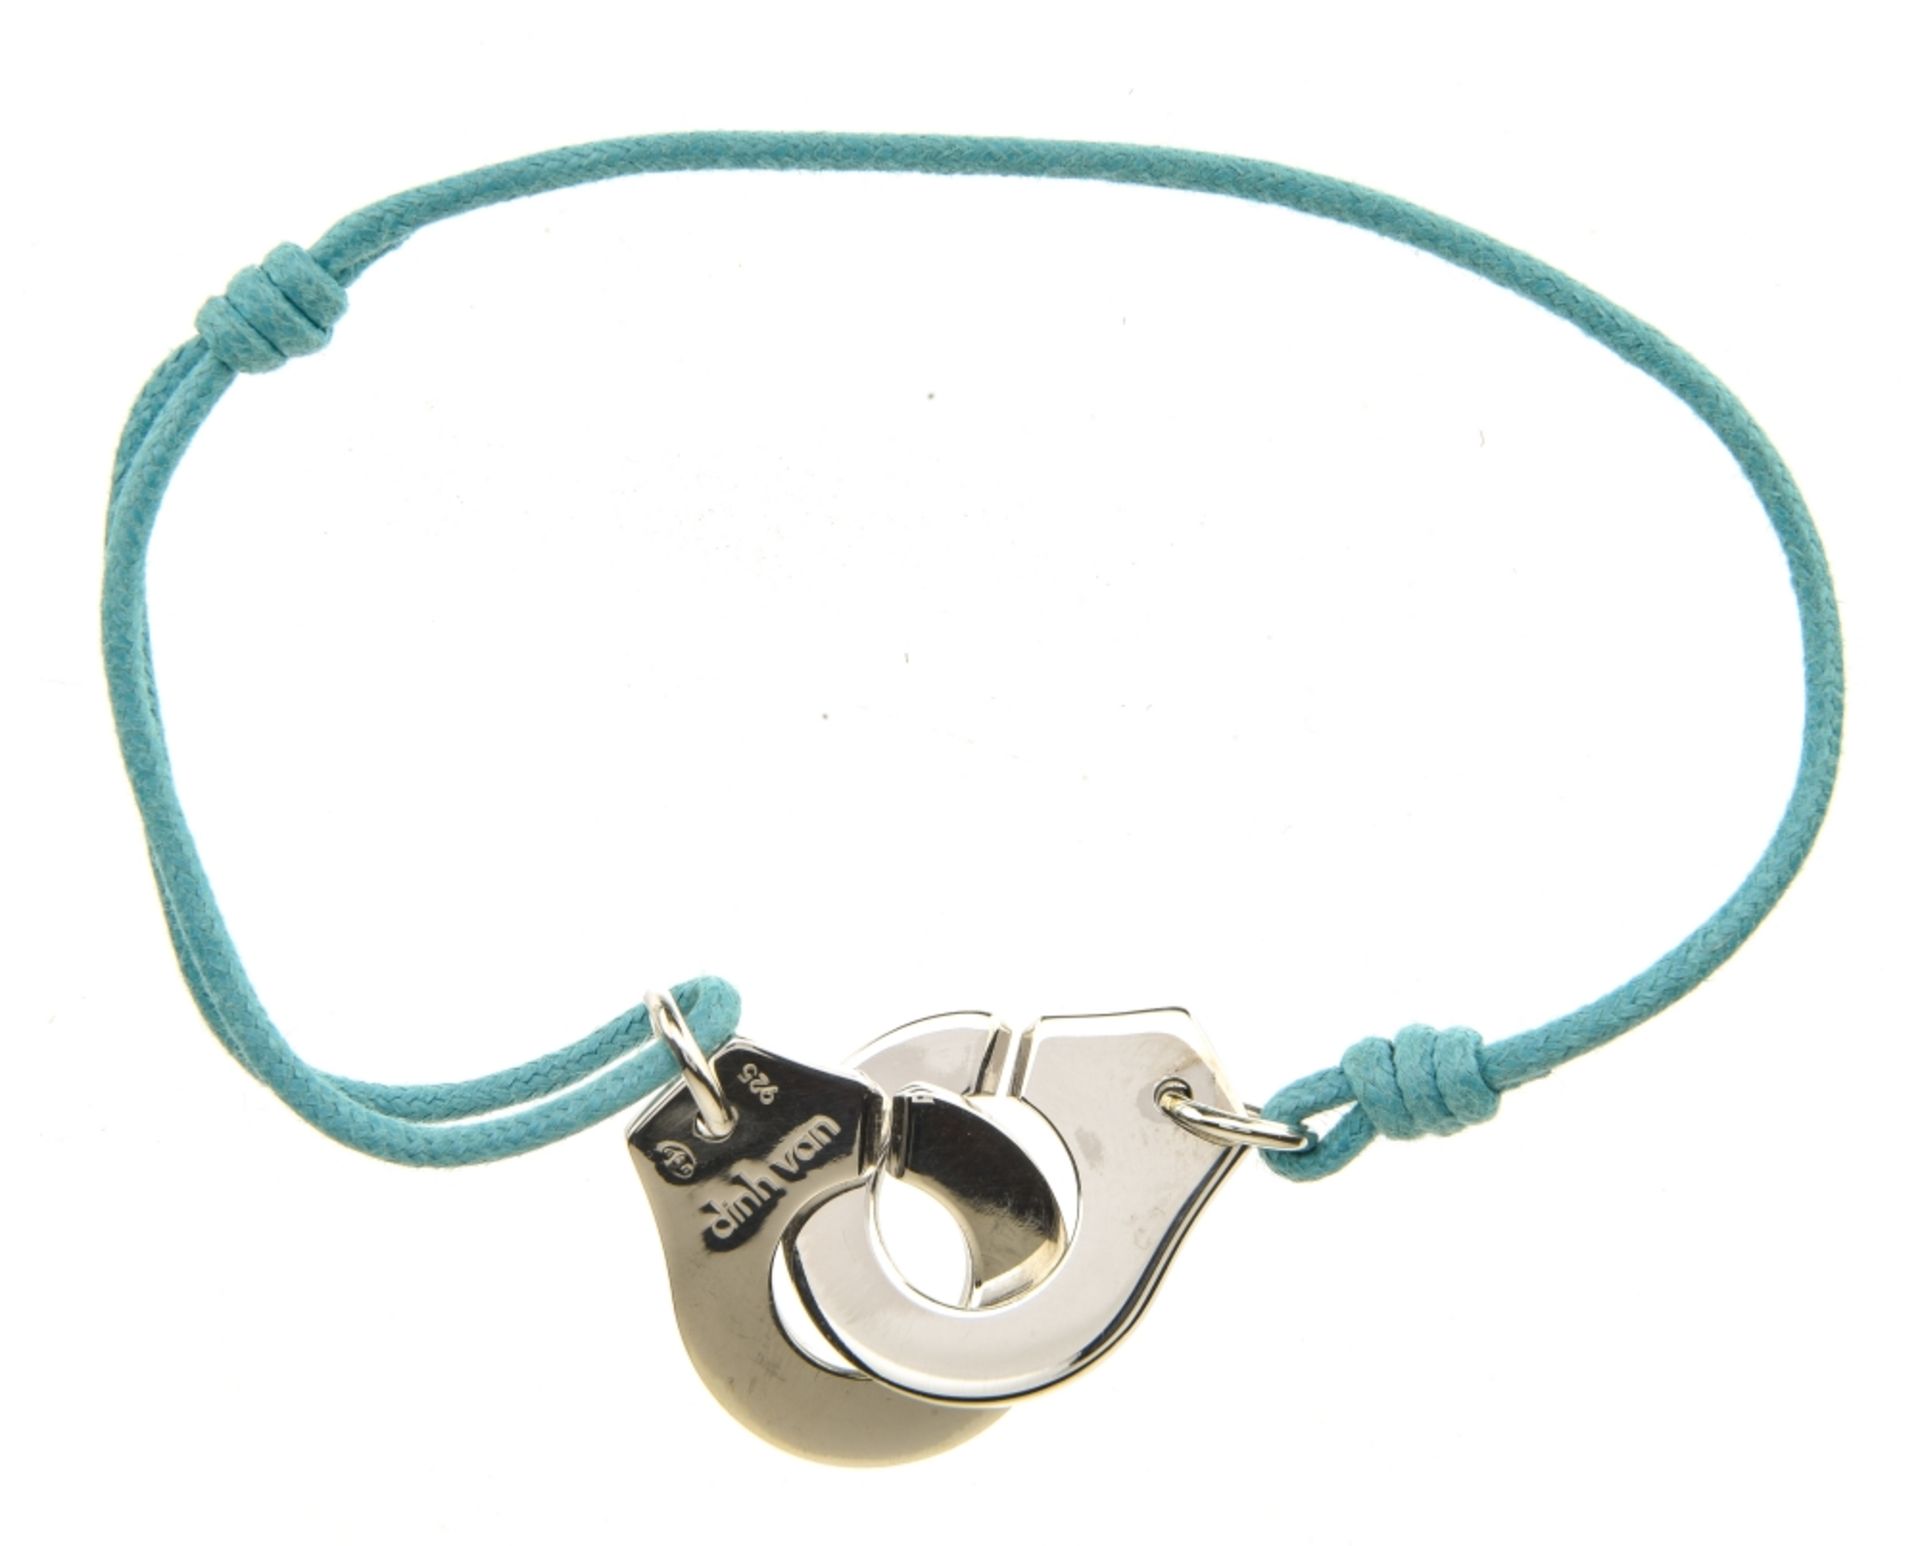 Dinh Van Menottes R15 cord bracelet Sterling silver. Large model. Turquoise cord. Very minor